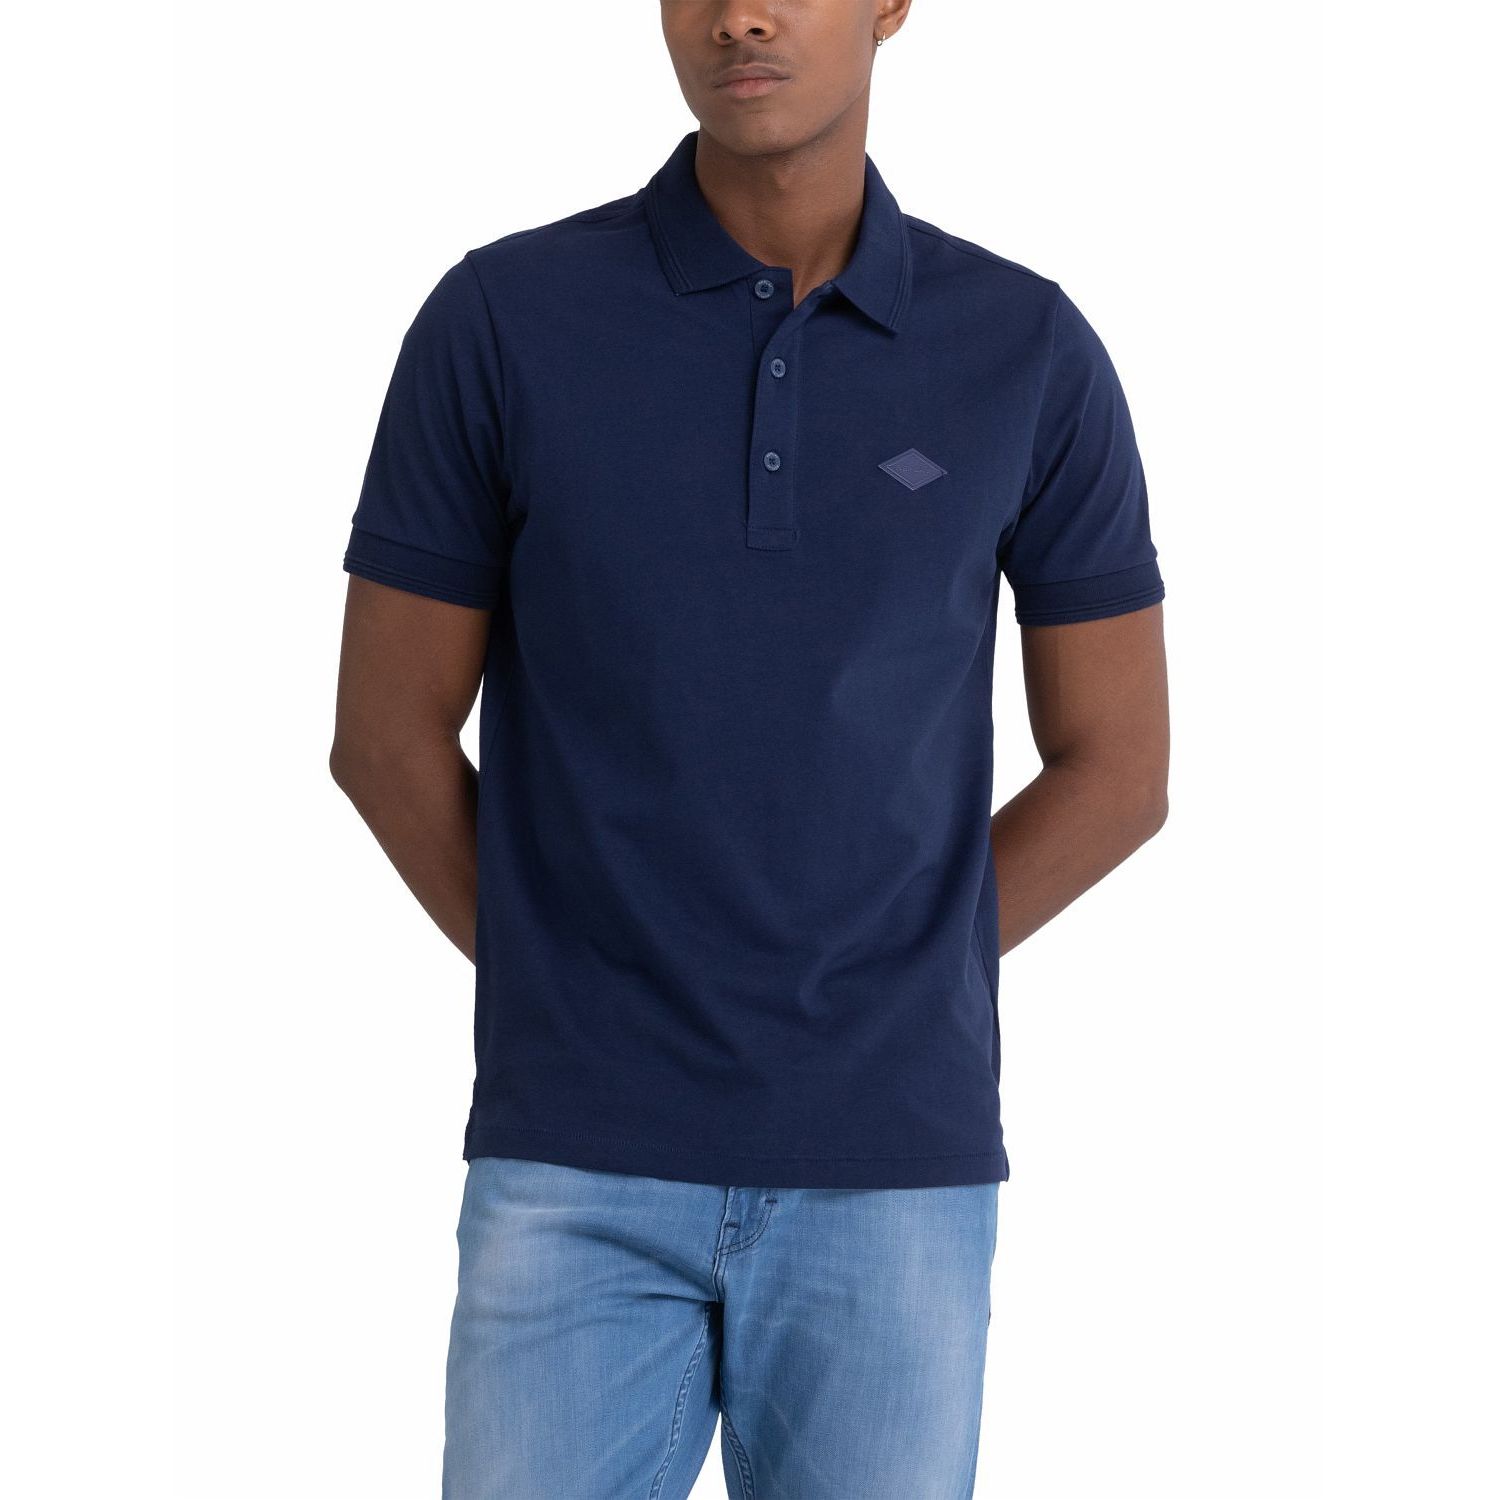 Replay M6548 polo navy blue